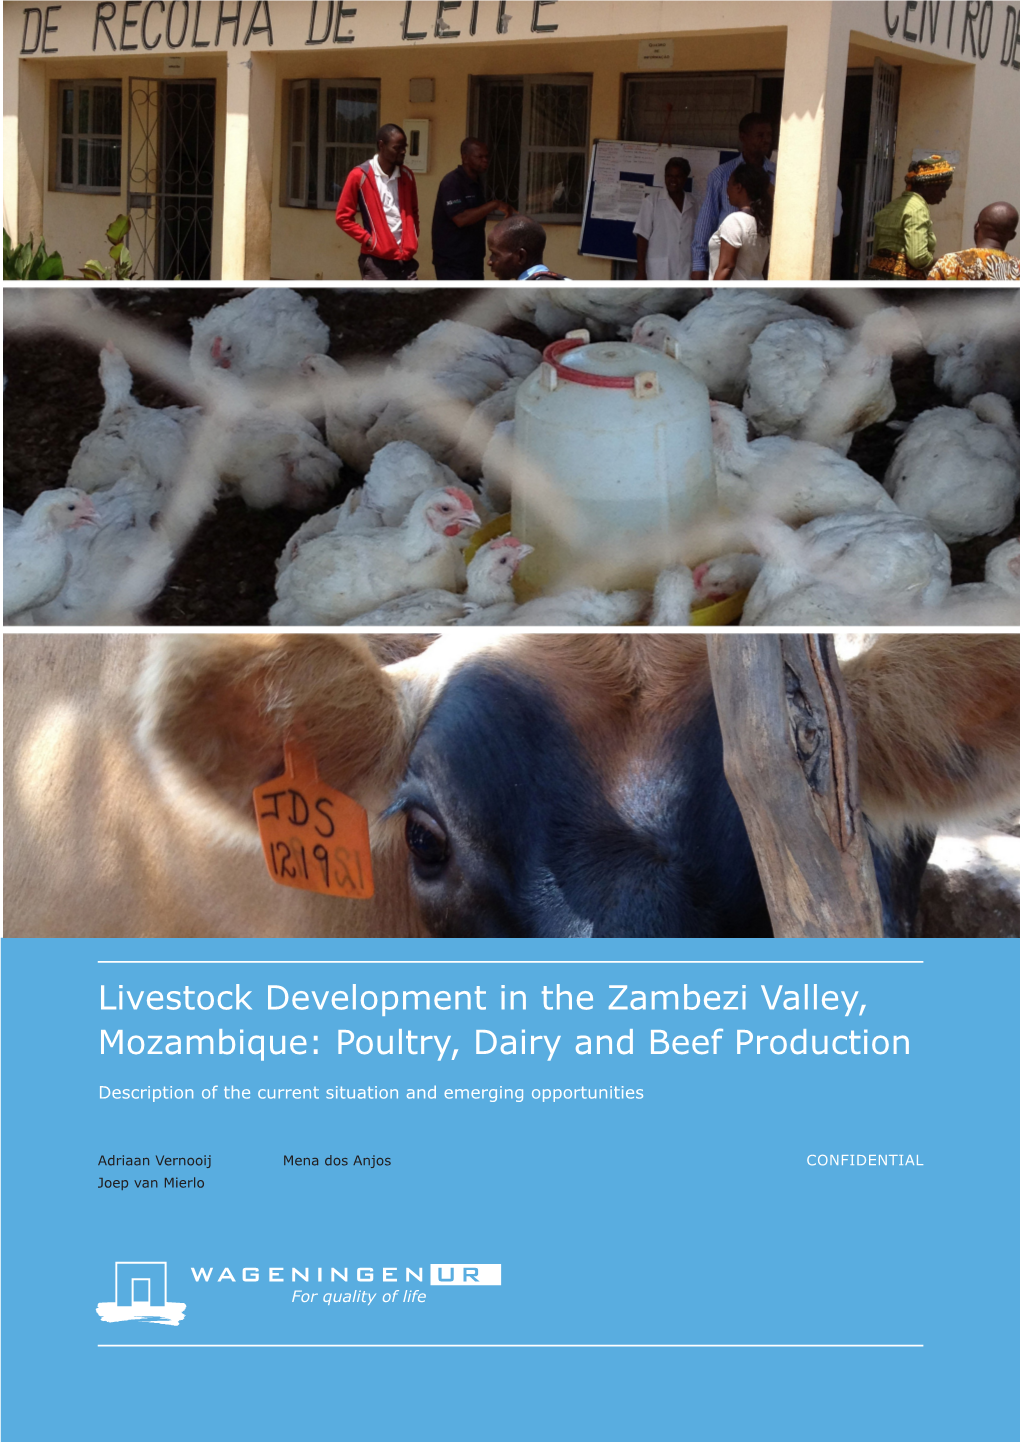 Livestock Development in the Zambezi Valley, Mozambique: Poultry, Dairy and Beef Production